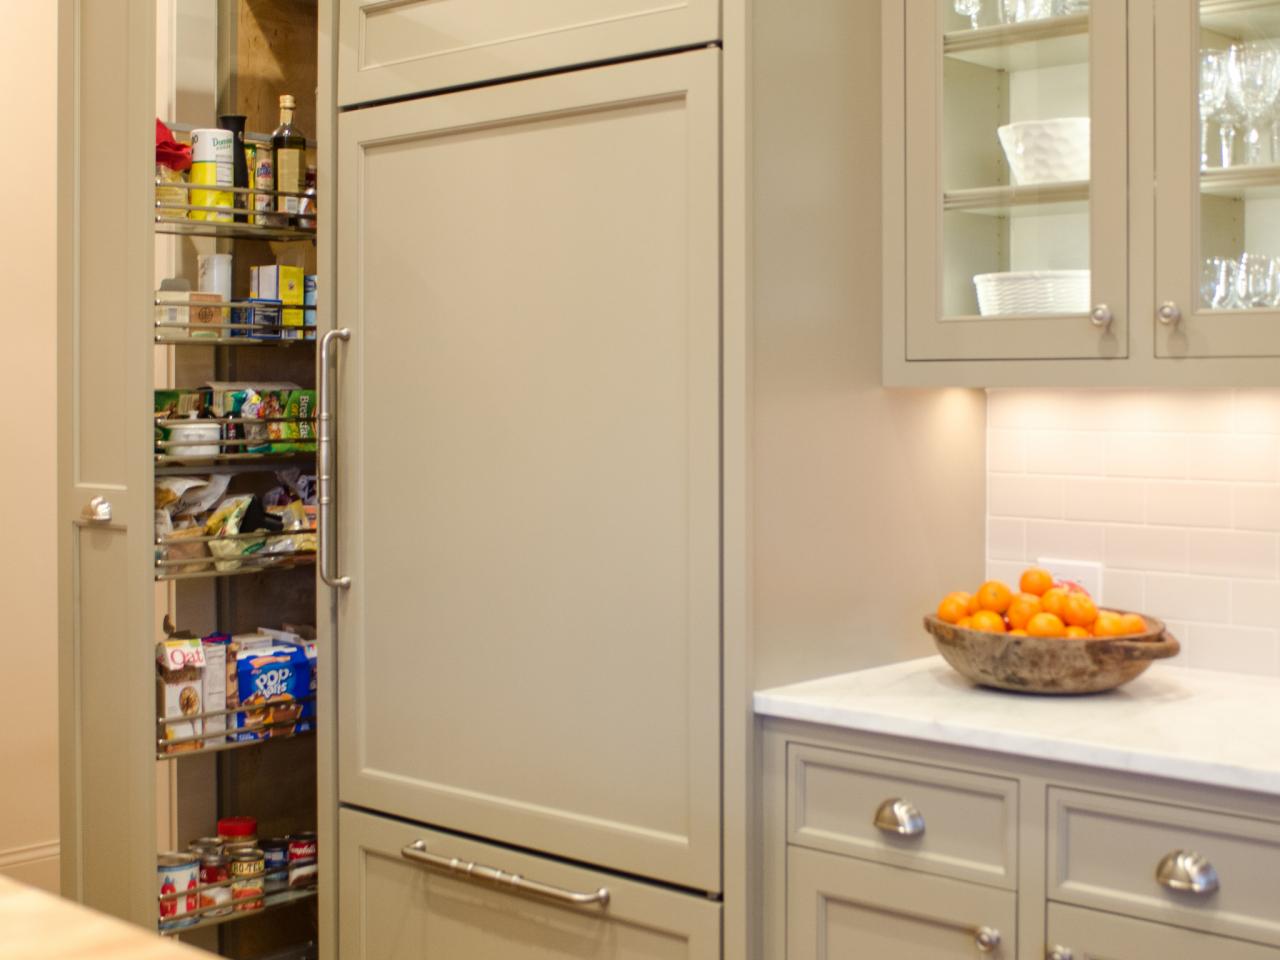 Pantry Cabinet Plans Pictures Options, Kitchen Cabinet Pantry Ideas